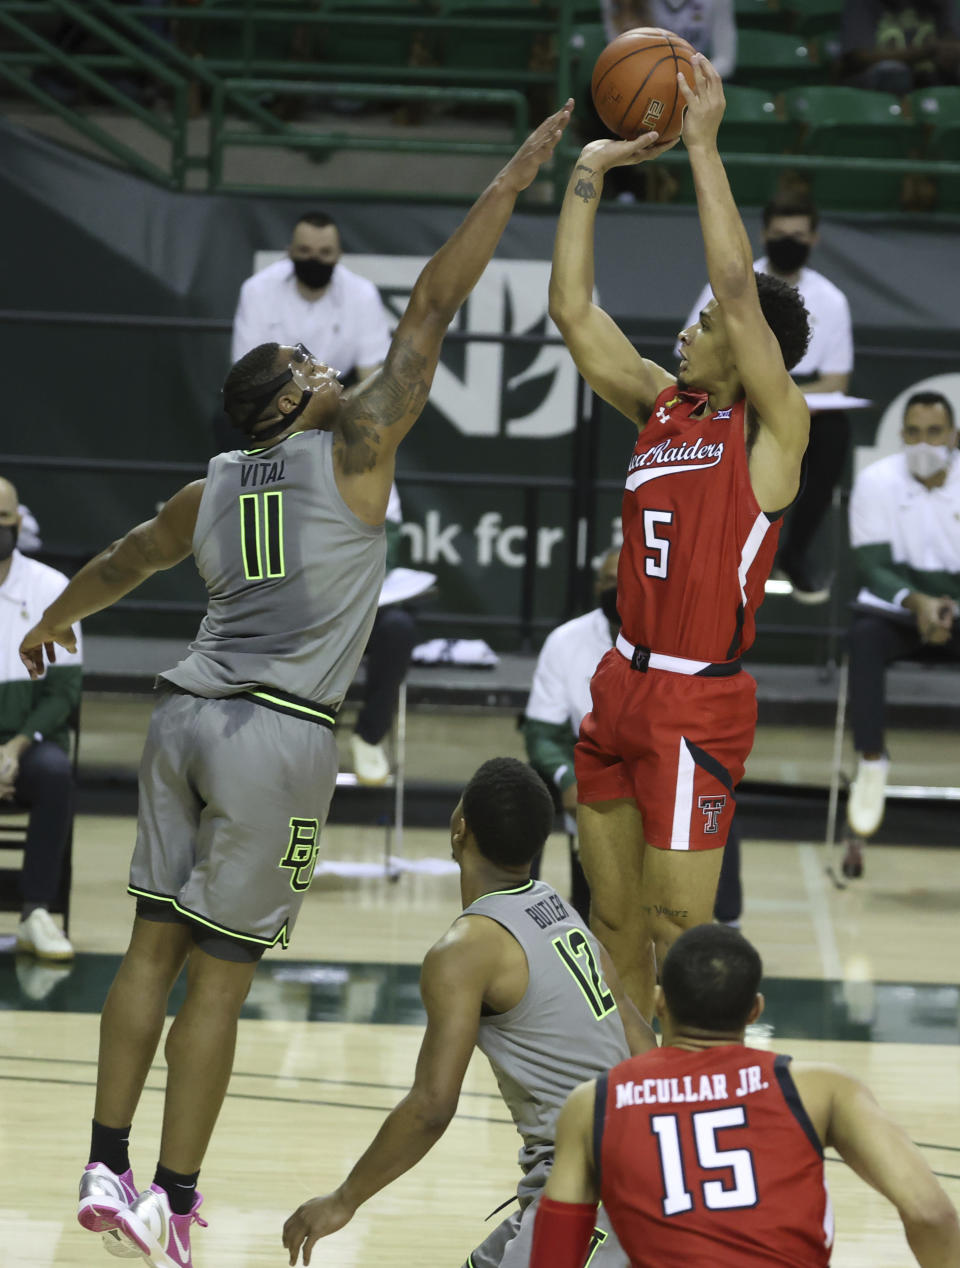 Texas Tech guard Micah Peavy (5) attempts a shot over Baylor guard Mark Vital (11) in the first half of an NCAA college basketball game Sunday, March 7, 2021, in Waco, Texas. (AP Photo/Jerry Larson)